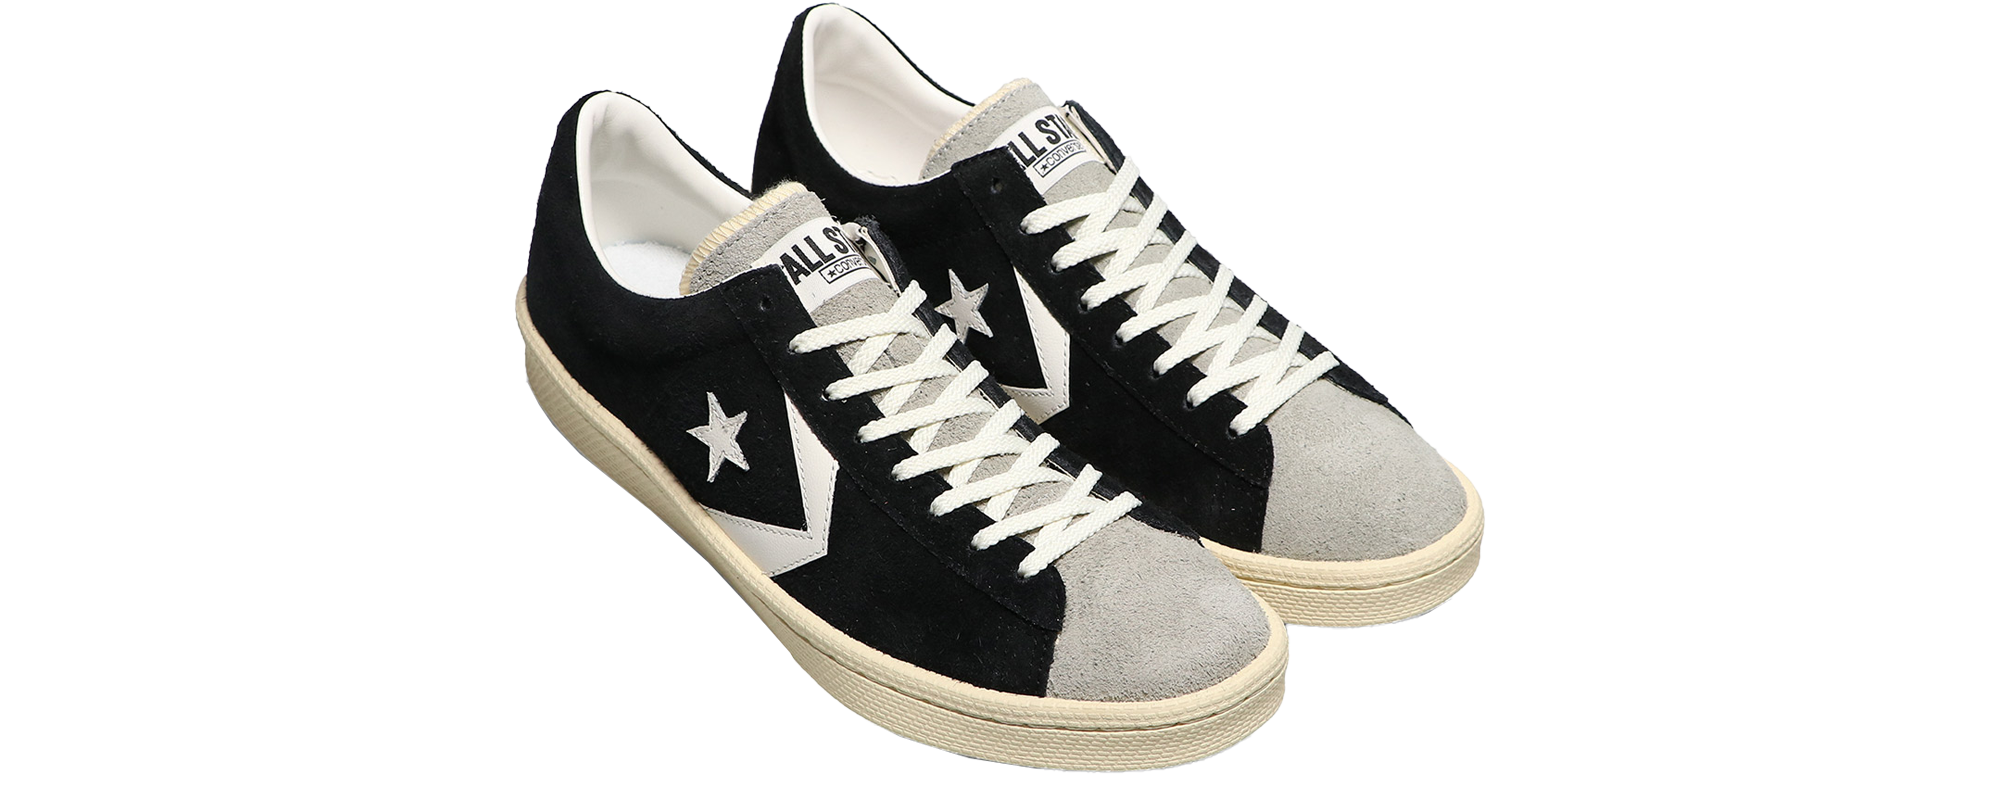 SOMA × CONVERSE PRO LEATHER VTG SUEDE OX